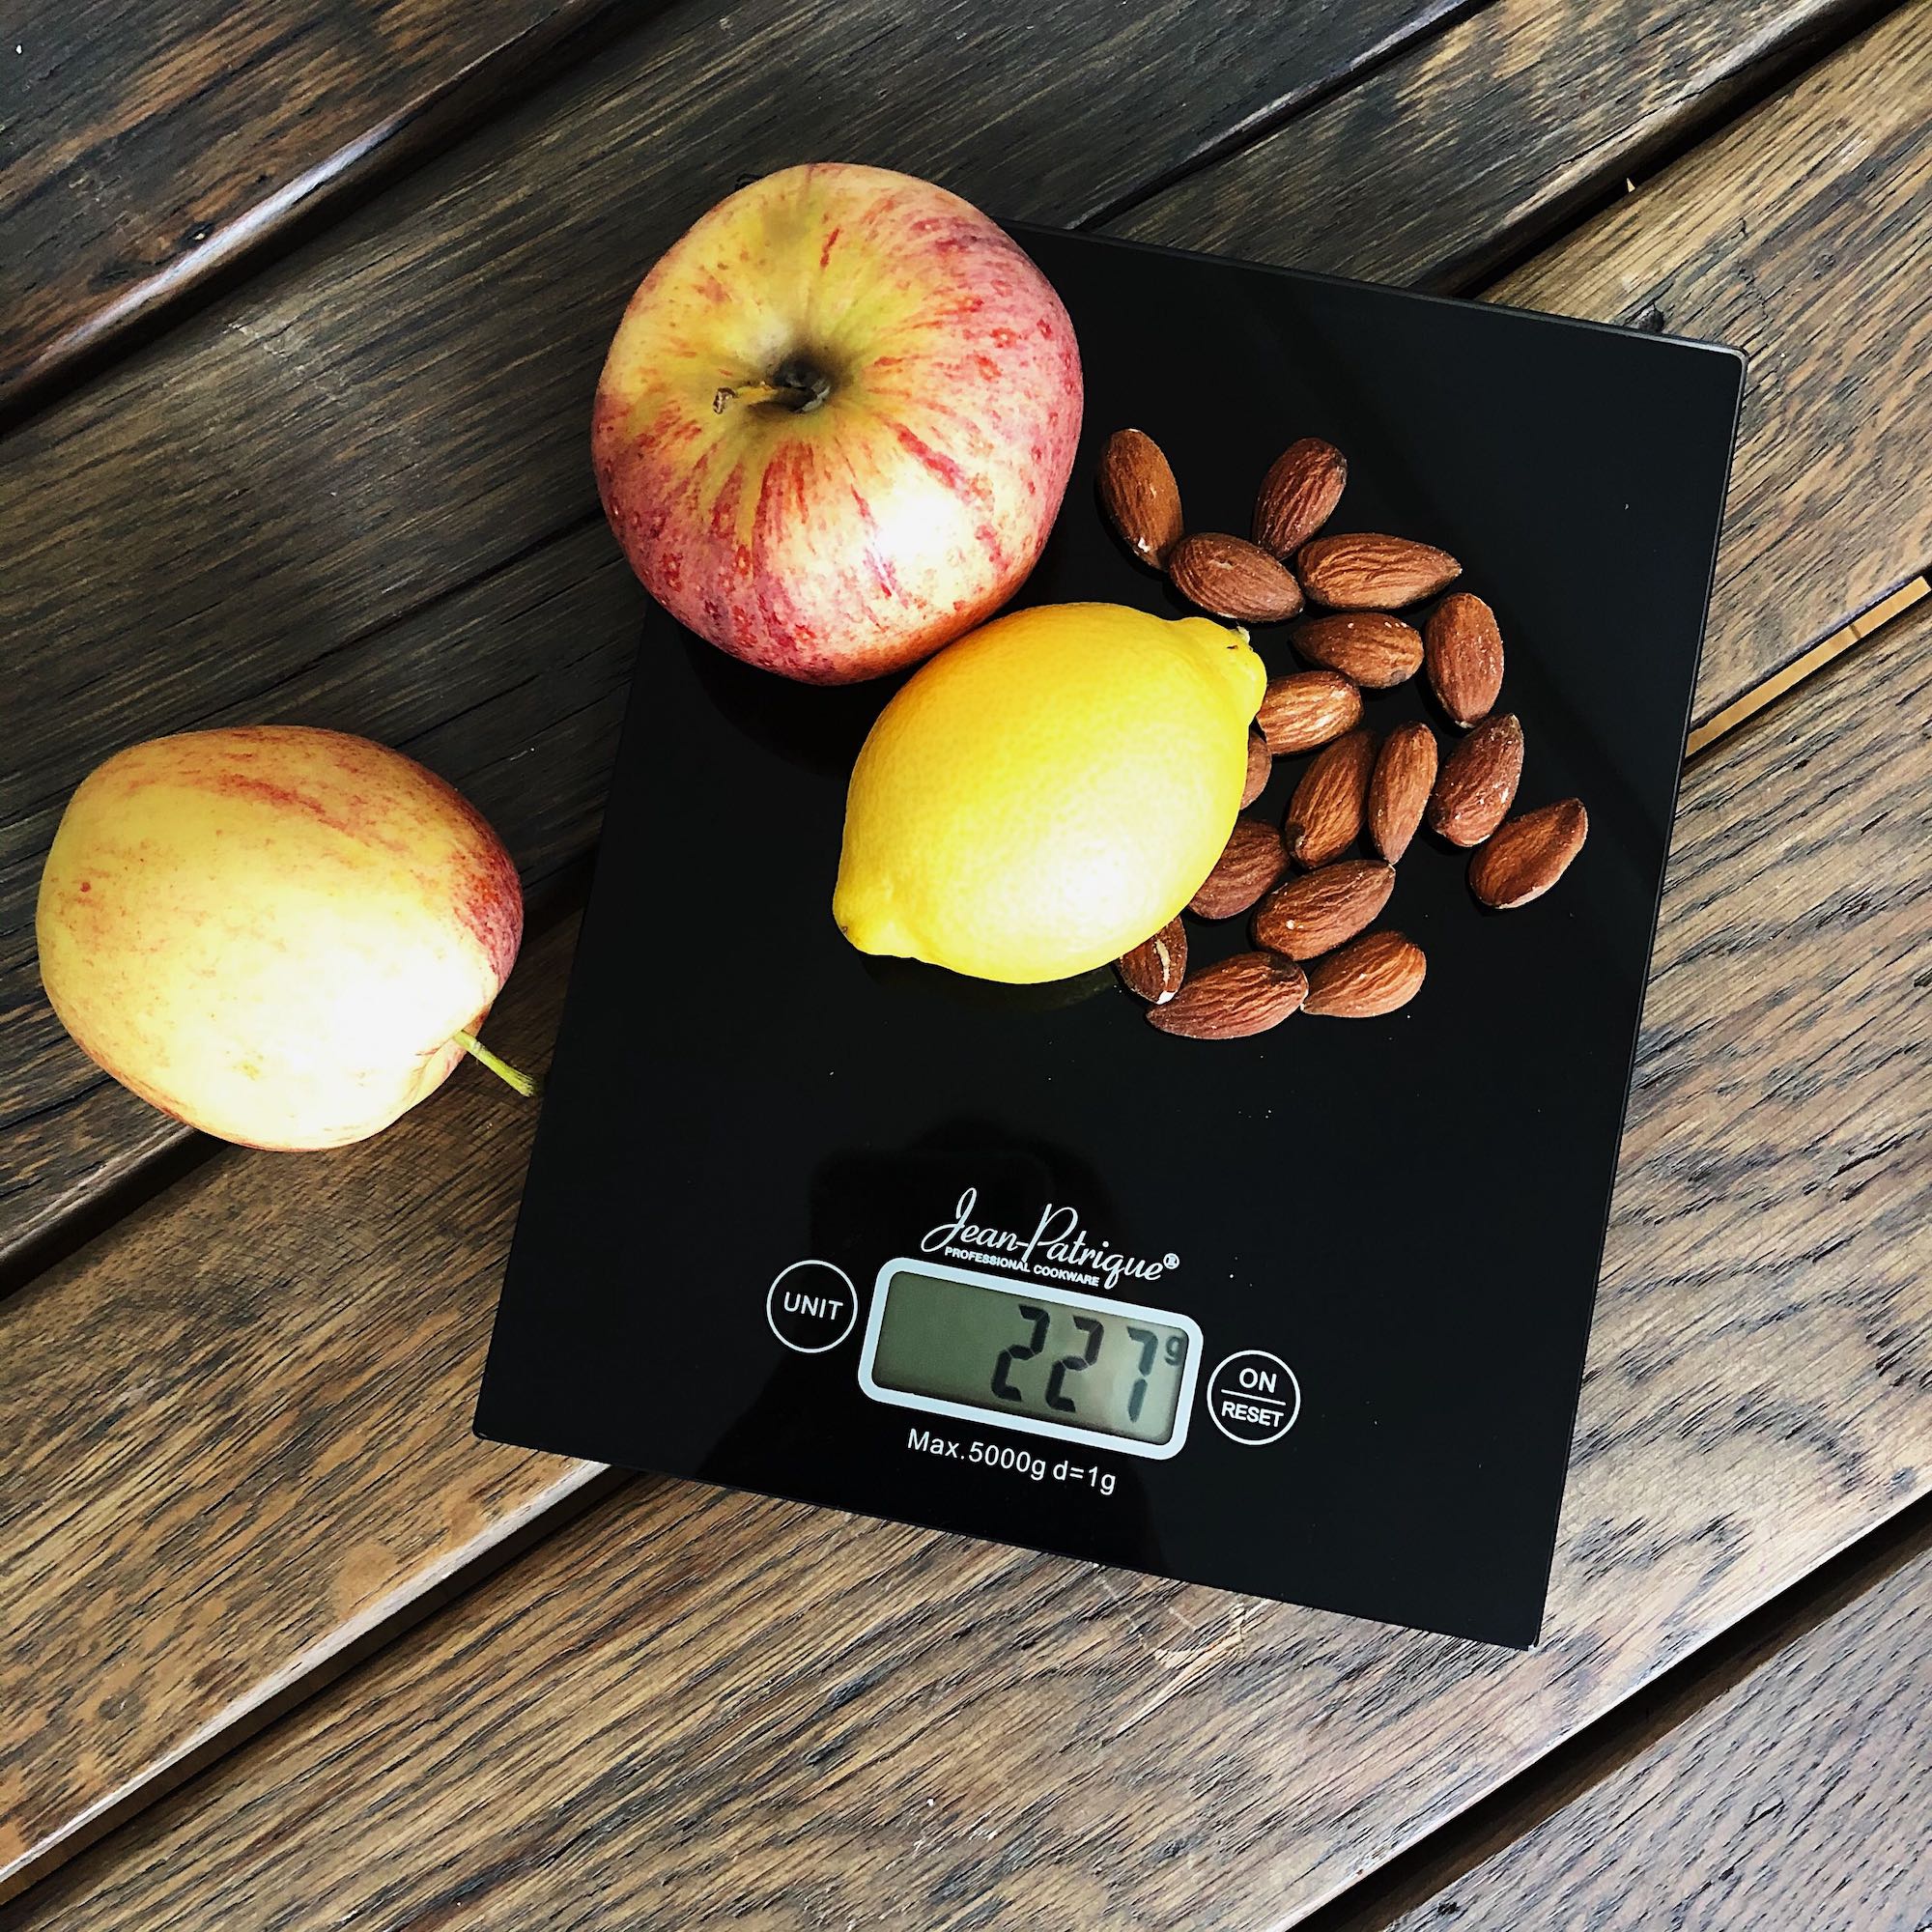 Weighing an Apple Fruit on a Digital Kitchen Scale in Grams on